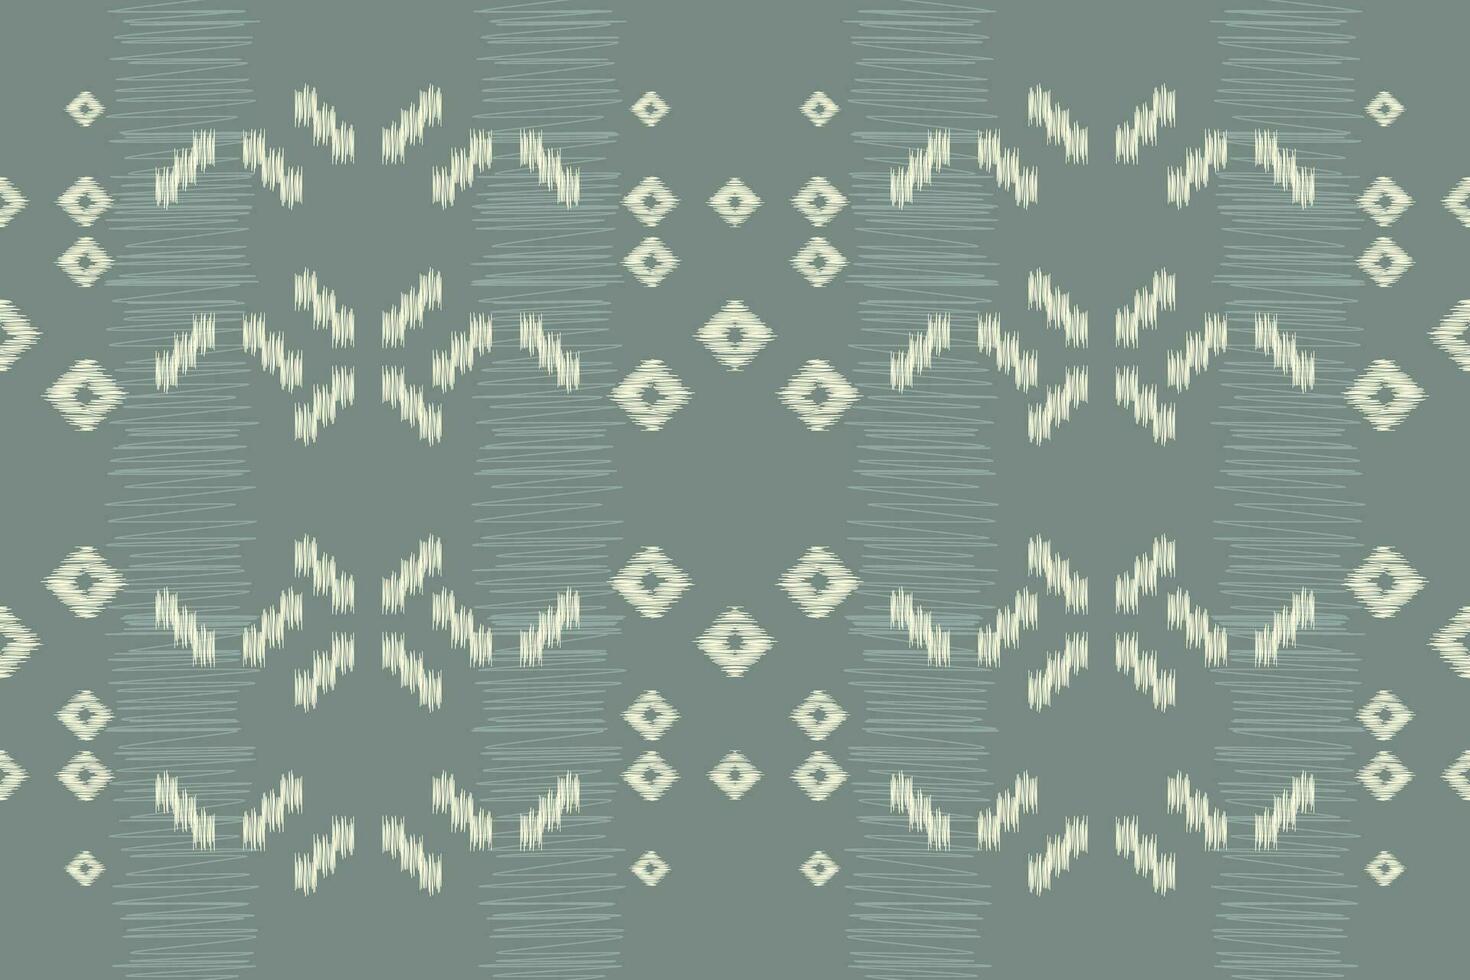 Ethnic Ikat fabric pattern geometric style.African Ikat embroidery Ethnic oriental pattern green gray background. Abstract,vector,illustration.Texture,clothing,frame,decoration,carpet,motif. vector